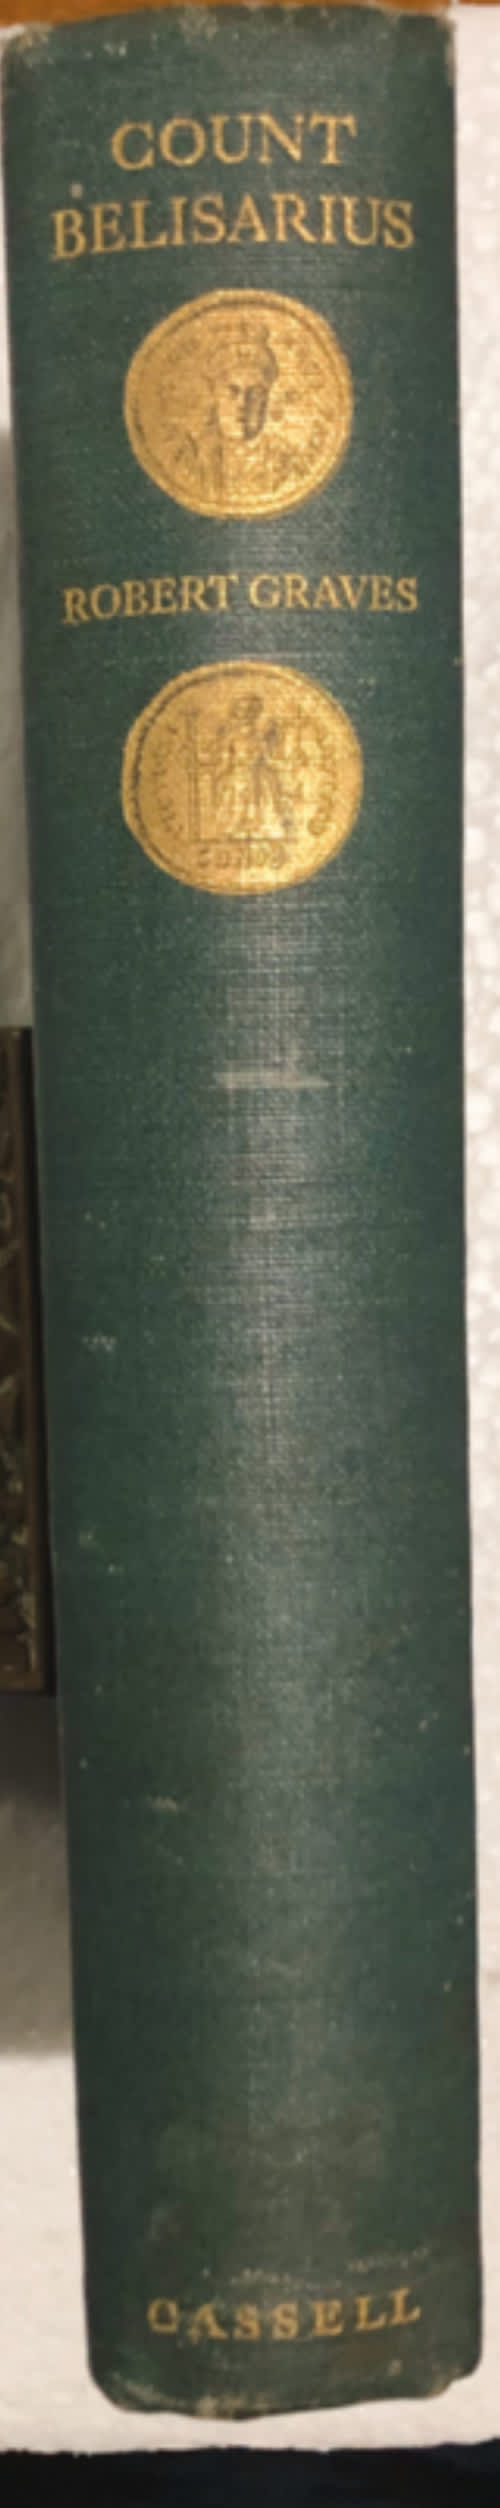 COUNT BELISARIUS BY ROBERT GRAVES FIRST EDITION